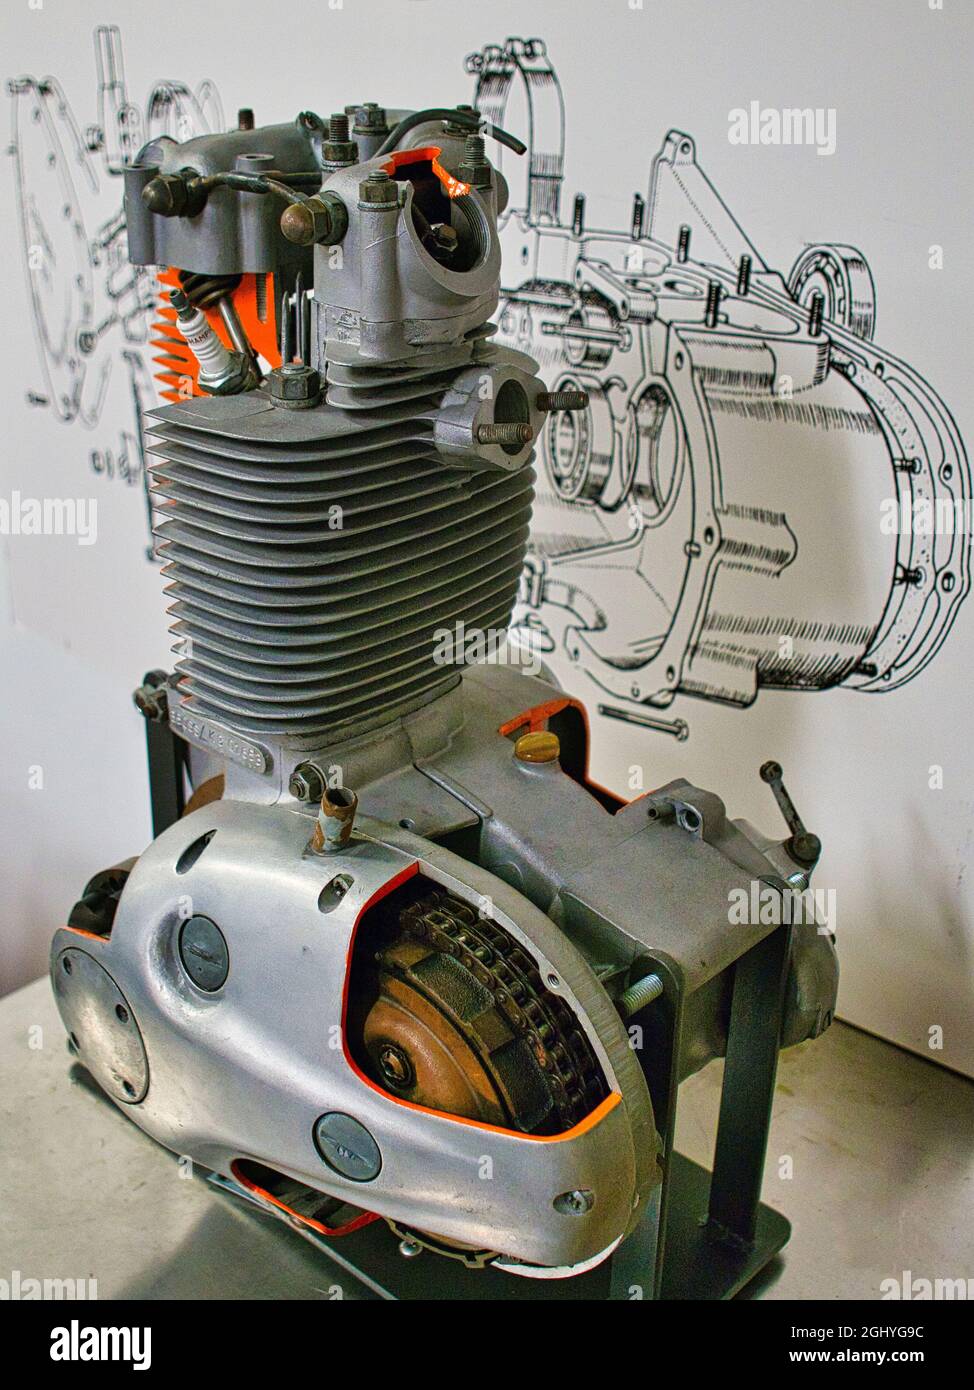 cut away detail of a motorcycle engine with line drawing im background Stock Photo